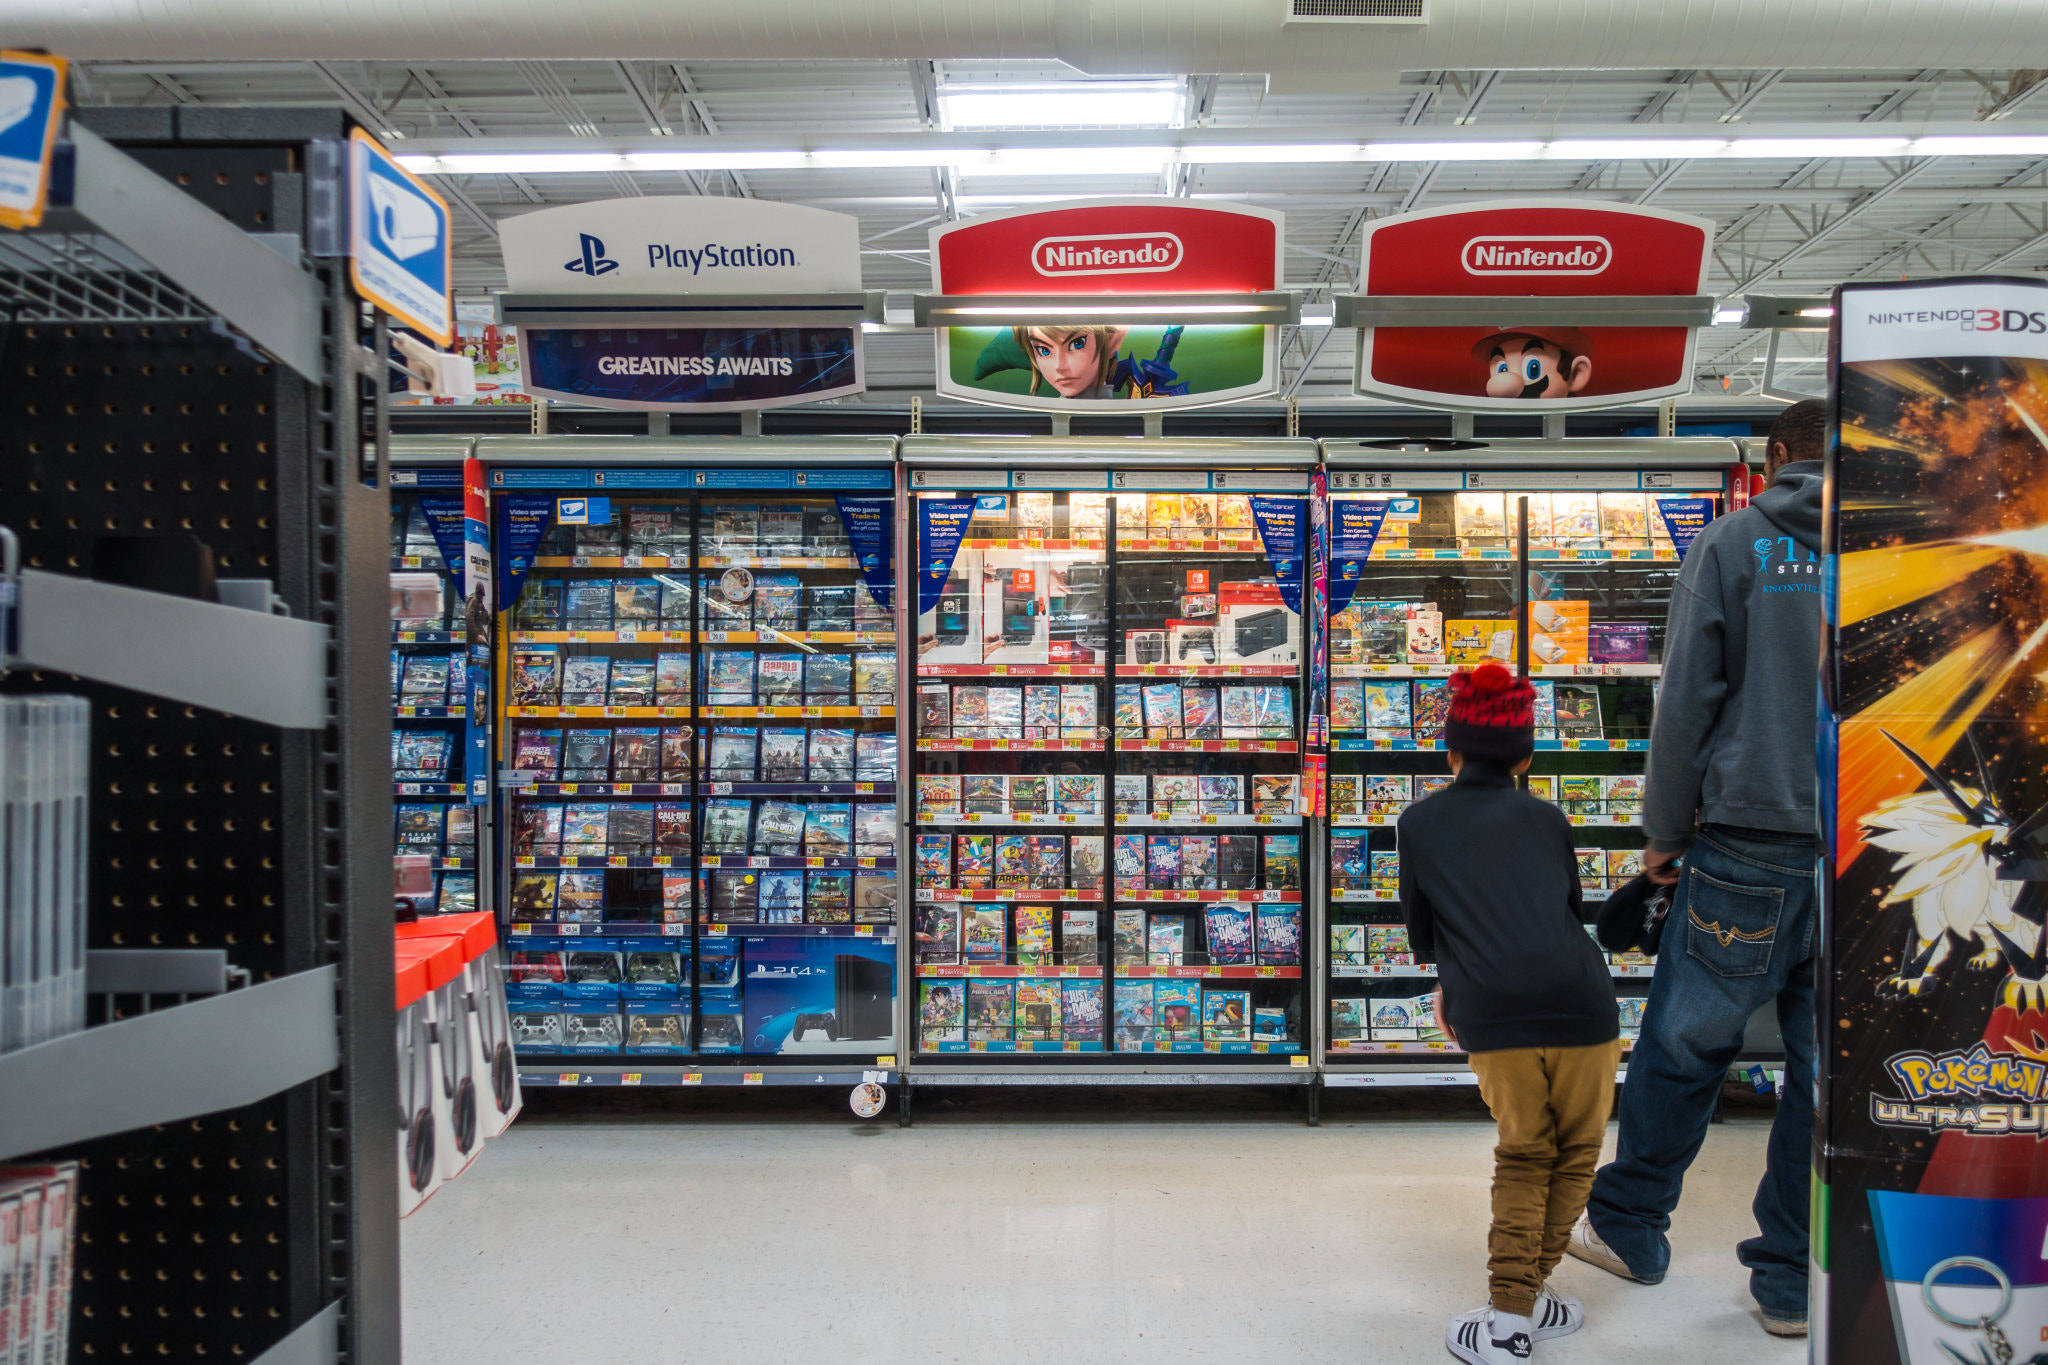 Wal-Mart Video Game Section Little Boy Looking at Games Shopping Scene December 2017